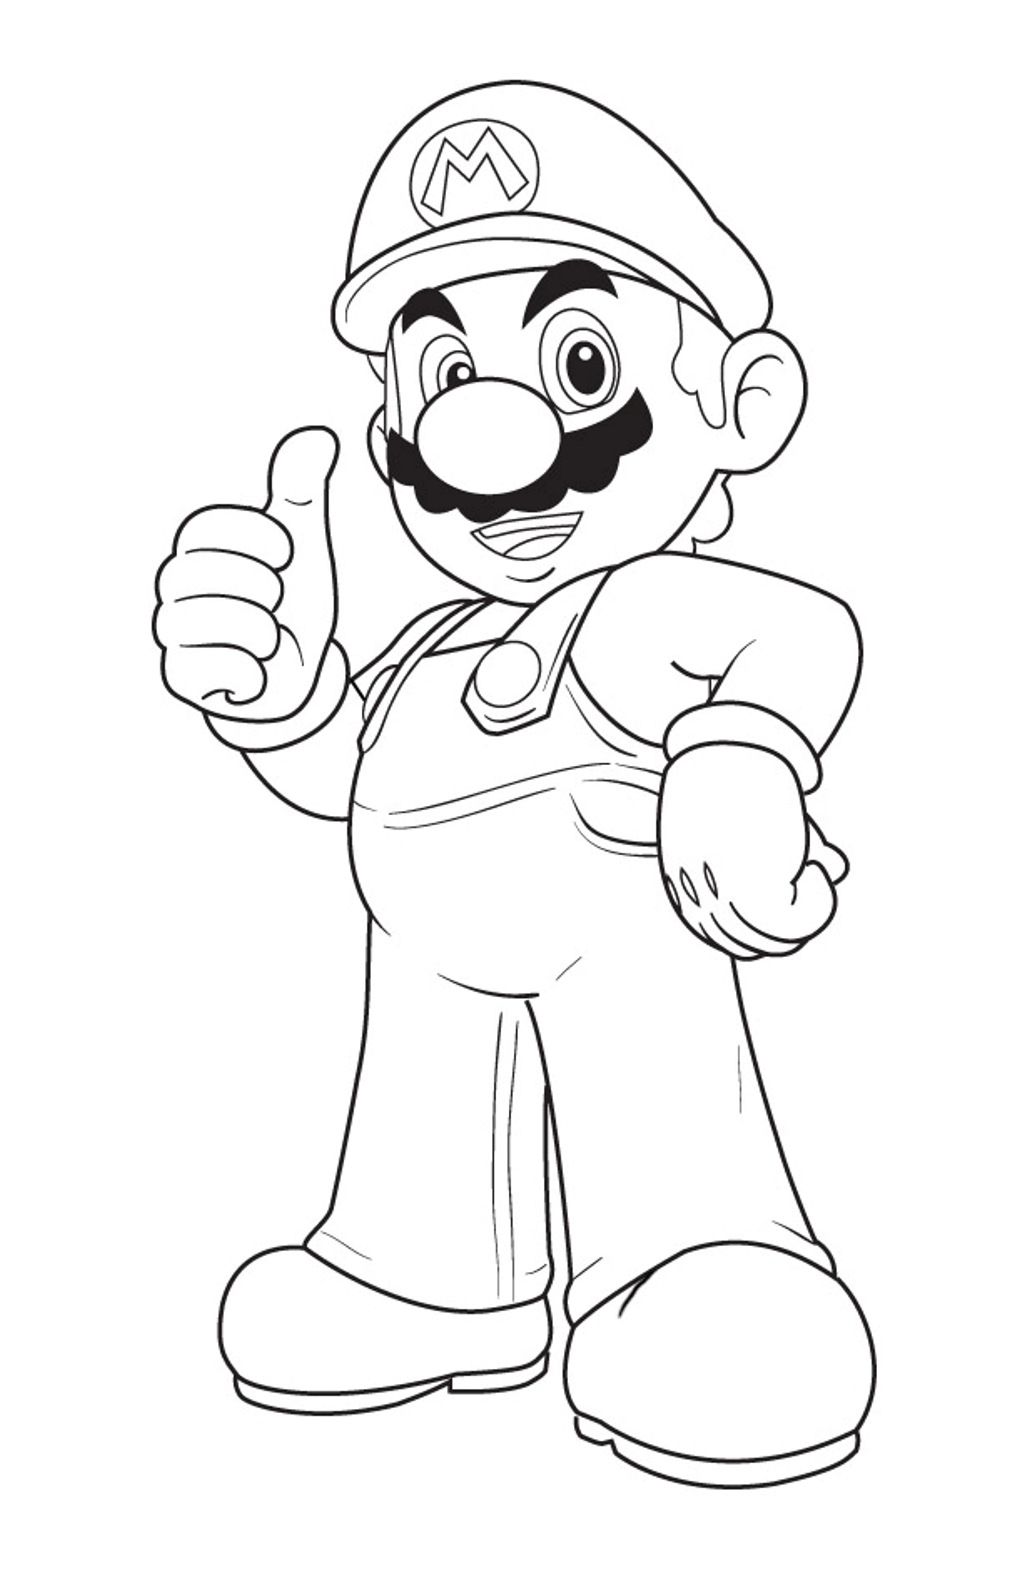 Mario Bros Coloring Pages Free | Cartoon Coloring pages of ...